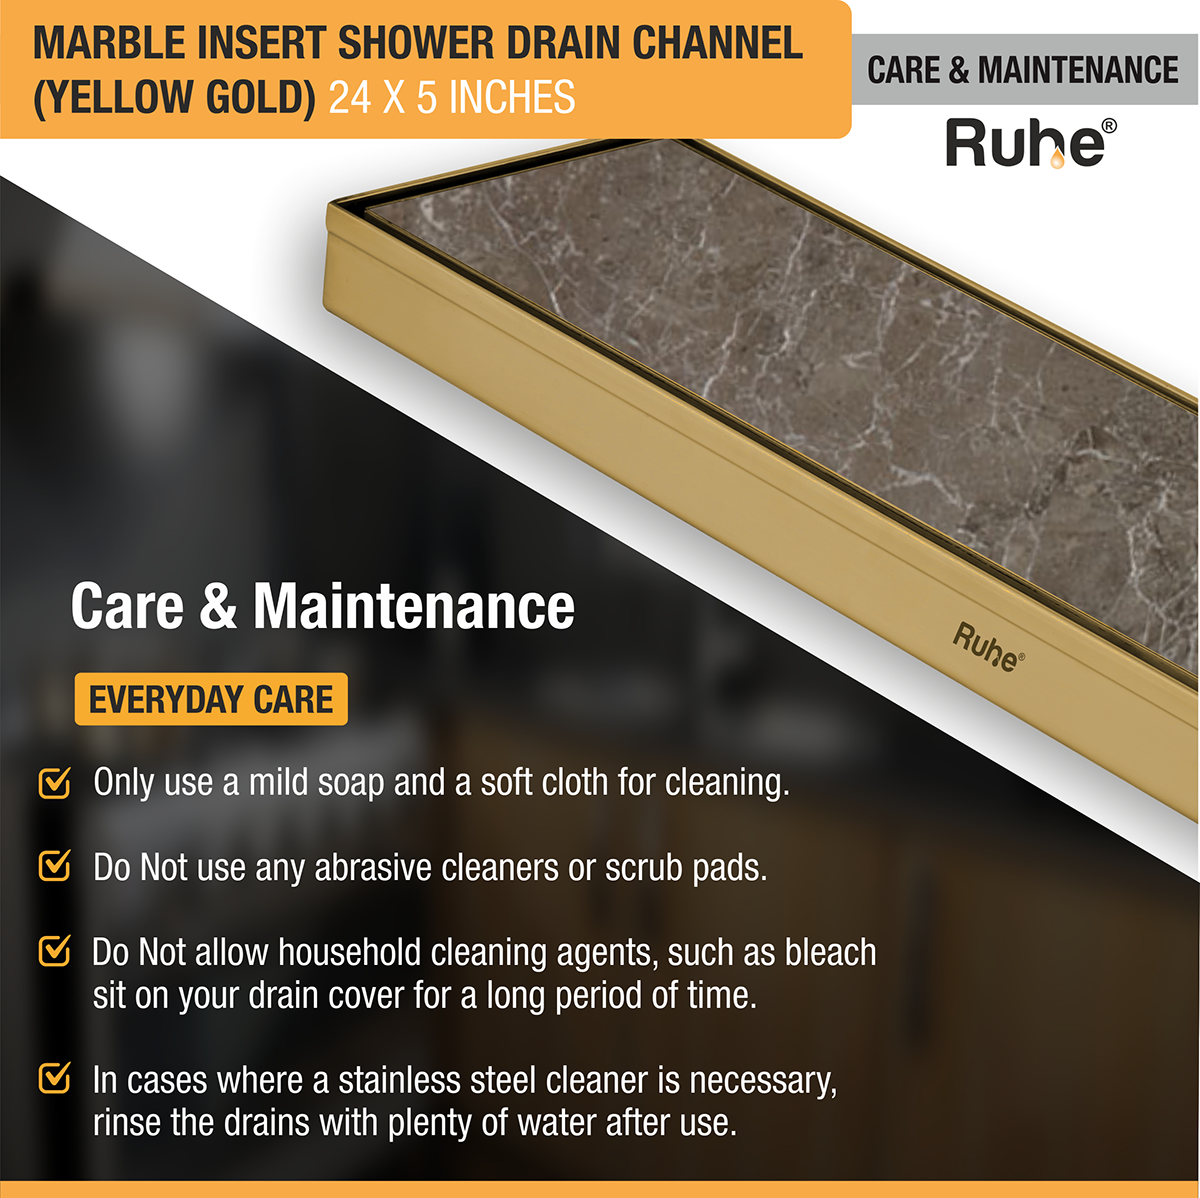 Marble Insert Shower Drain Channel (24 x 5 Inches) YELLOW GOLD PVD Coated care and maintenance